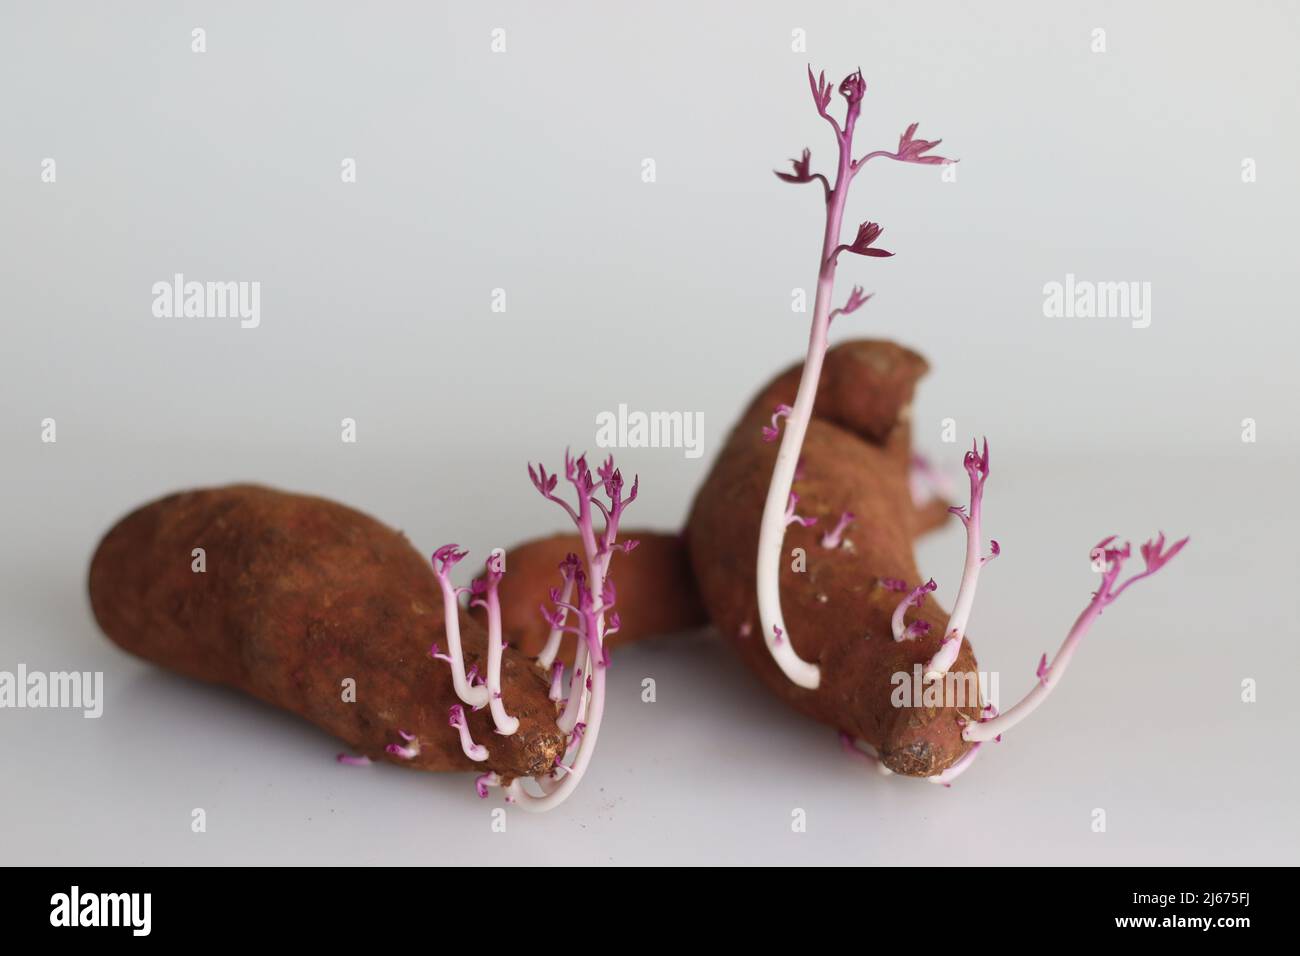 Sprouted sweet potato. The sweet potato or sweetpotato is a dicotyledonous plant that belongs to the bindweed or morning glory family, Convolvulaceae. Stock Photo